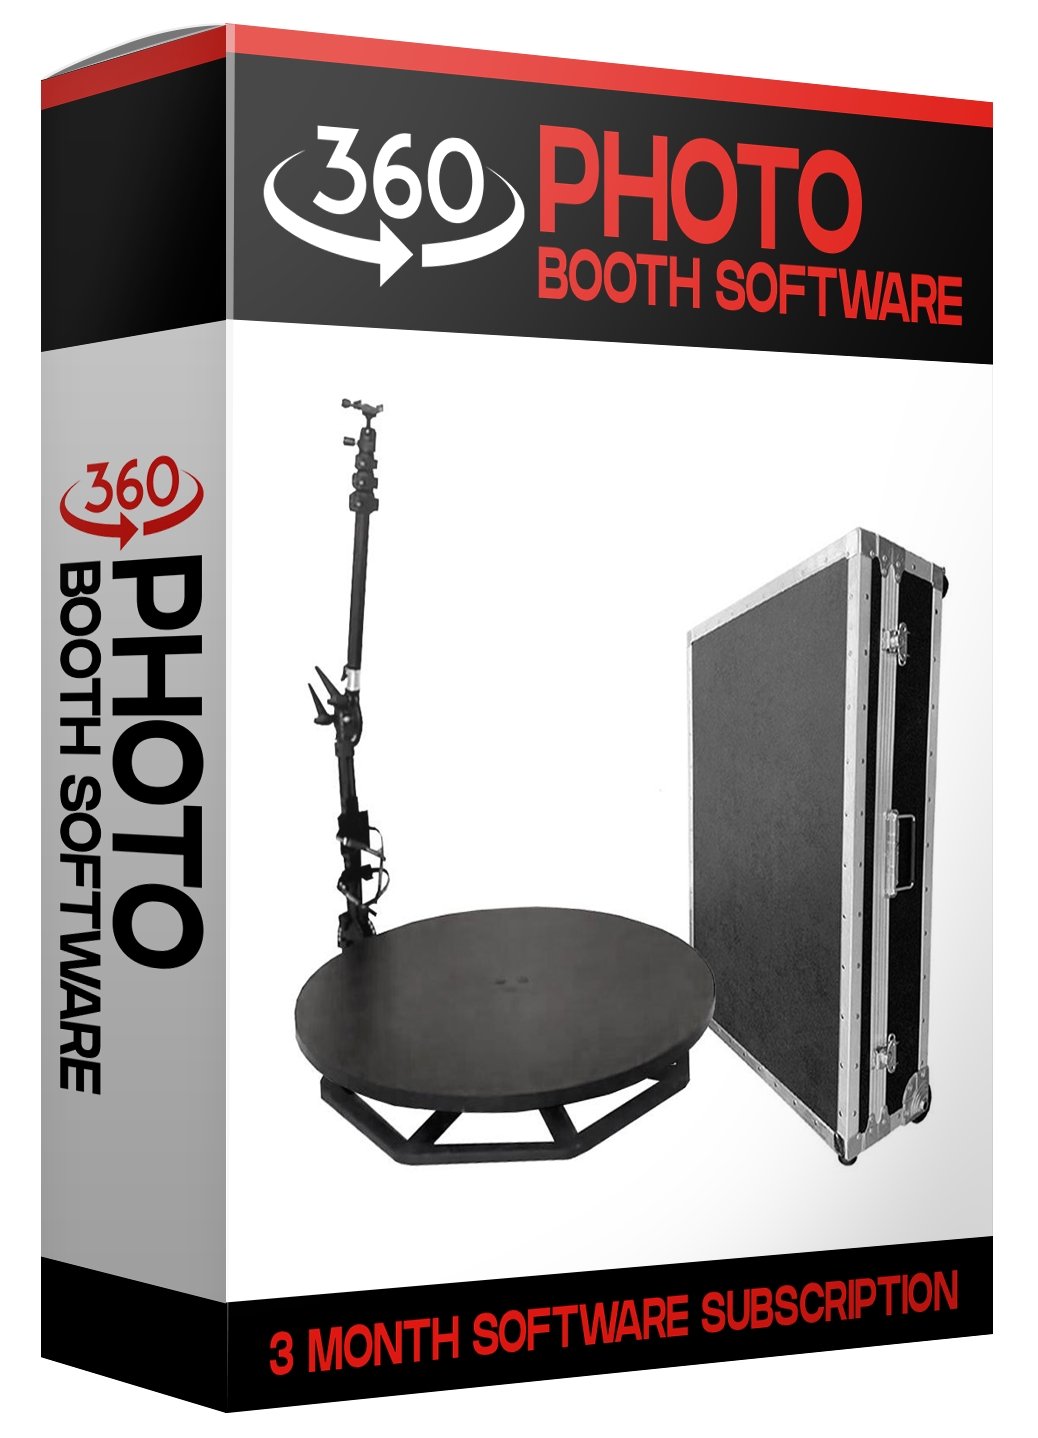 Revospin RM-4 Round 360 Photo Booth Premium Package (Manual Spin) - VS Booths 360